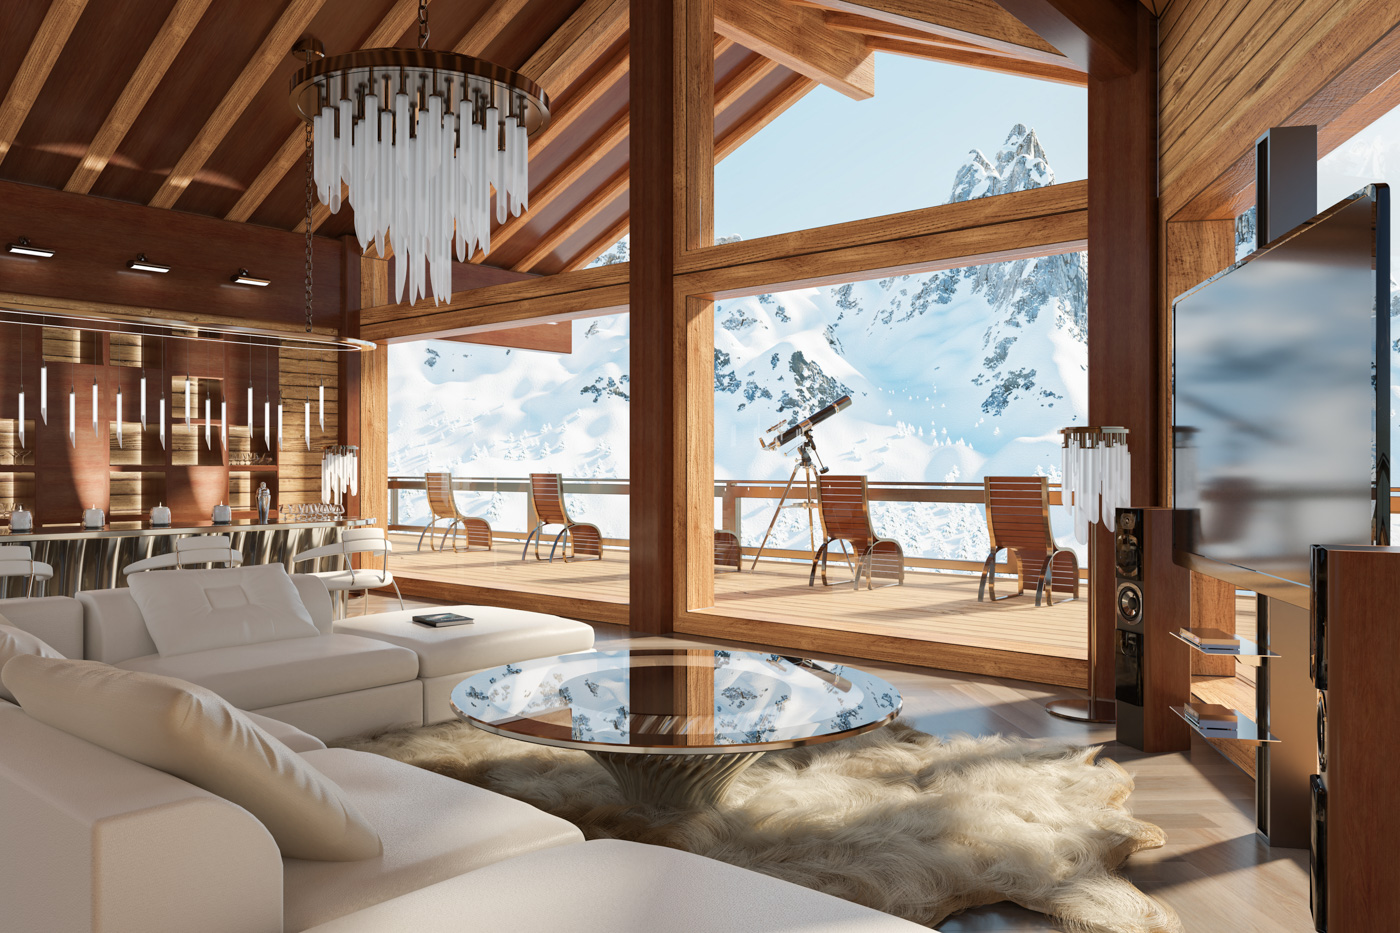 location chalet ski immobilier luxe vacances accompagnement